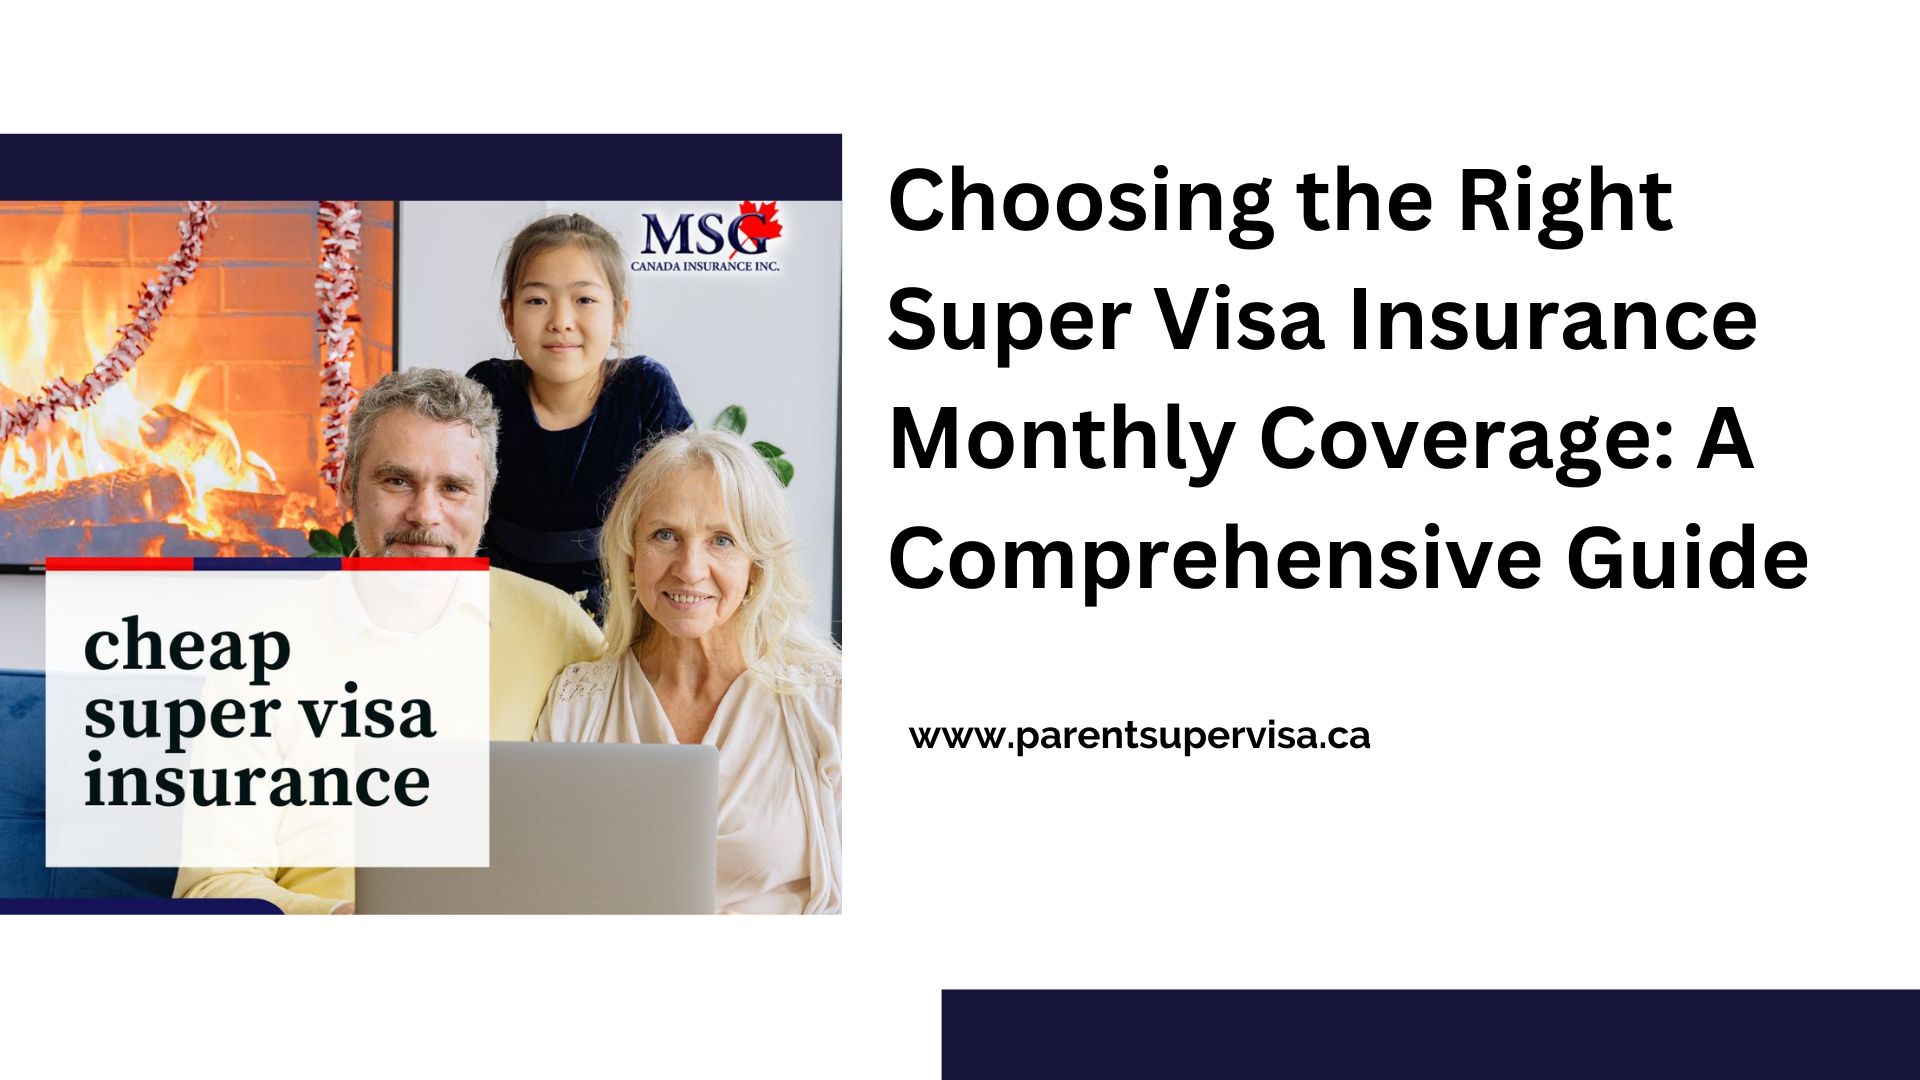 Choosing the Right Super Visa Insurance Monthly Coverage: A Comprehensive Guide